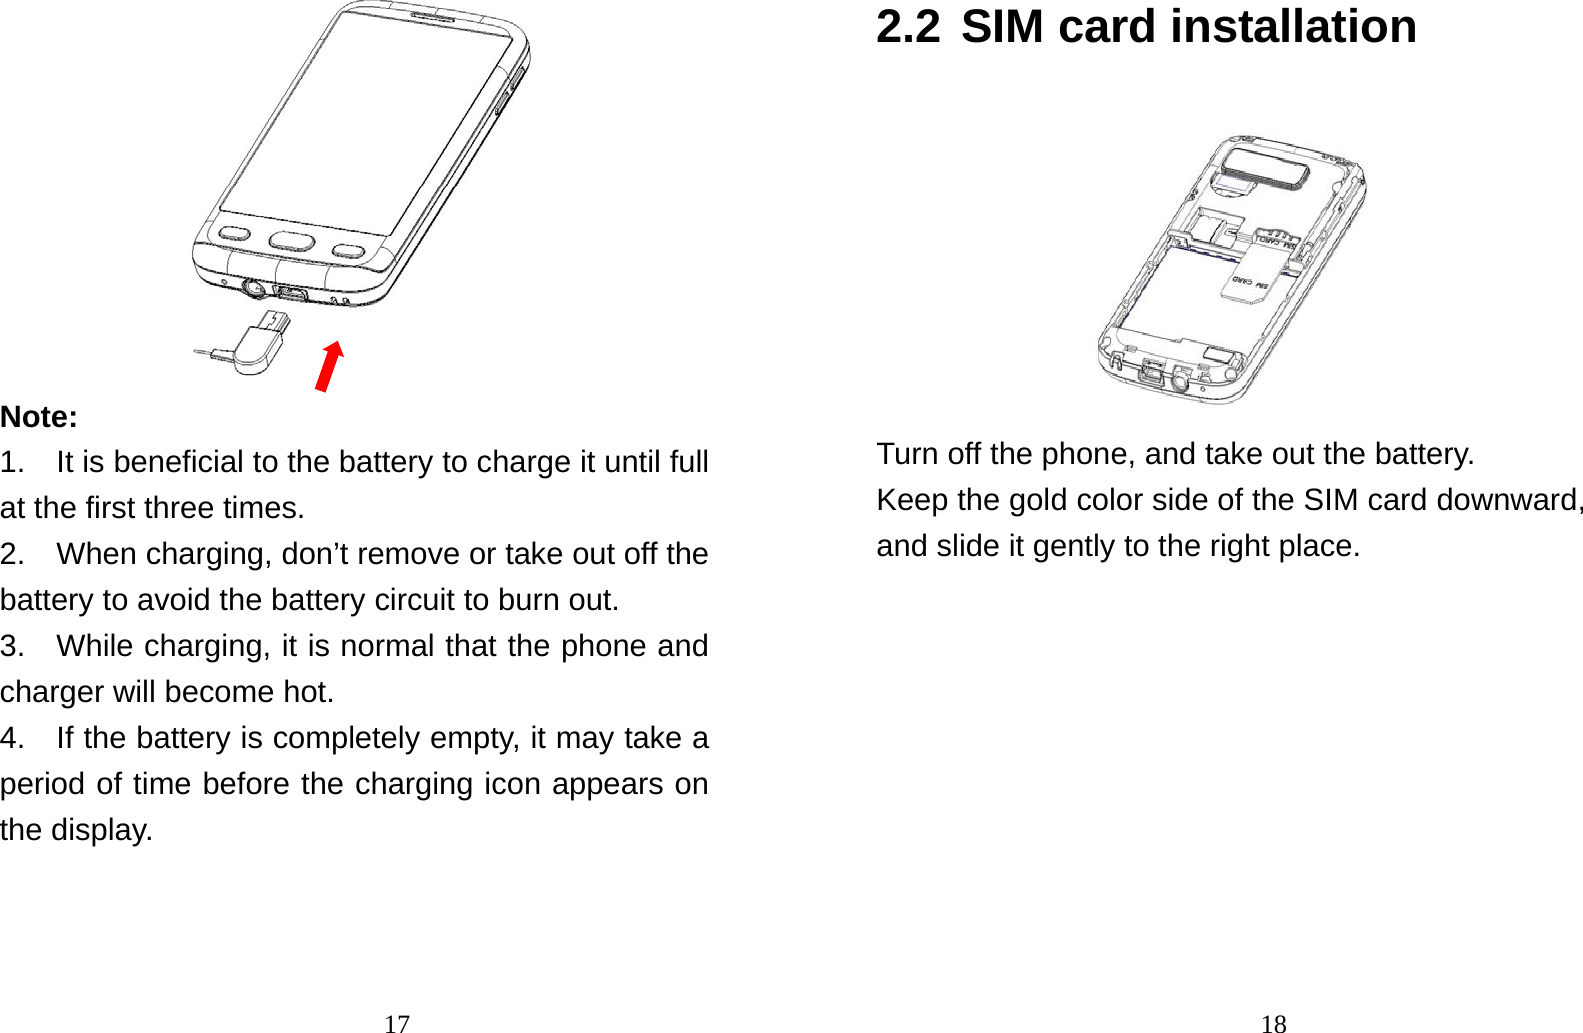                                17 Note:  1.    It is beneficial to the battery to charge it until full at the first three times. 2.    When charging, don’t remove or take out off the battery to avoid the battery circuit to burn out. 3.   While charging, it is normal that the phone and charger will become hot.   4.    If the battery is completely empty, it may take a period of time before the charging icon appears on the display.                                182.2 SIM card installation  Turn off the phone, and take out the battery. Keep the gold color side of the SIM card downward, and slide it gently to the right place. 